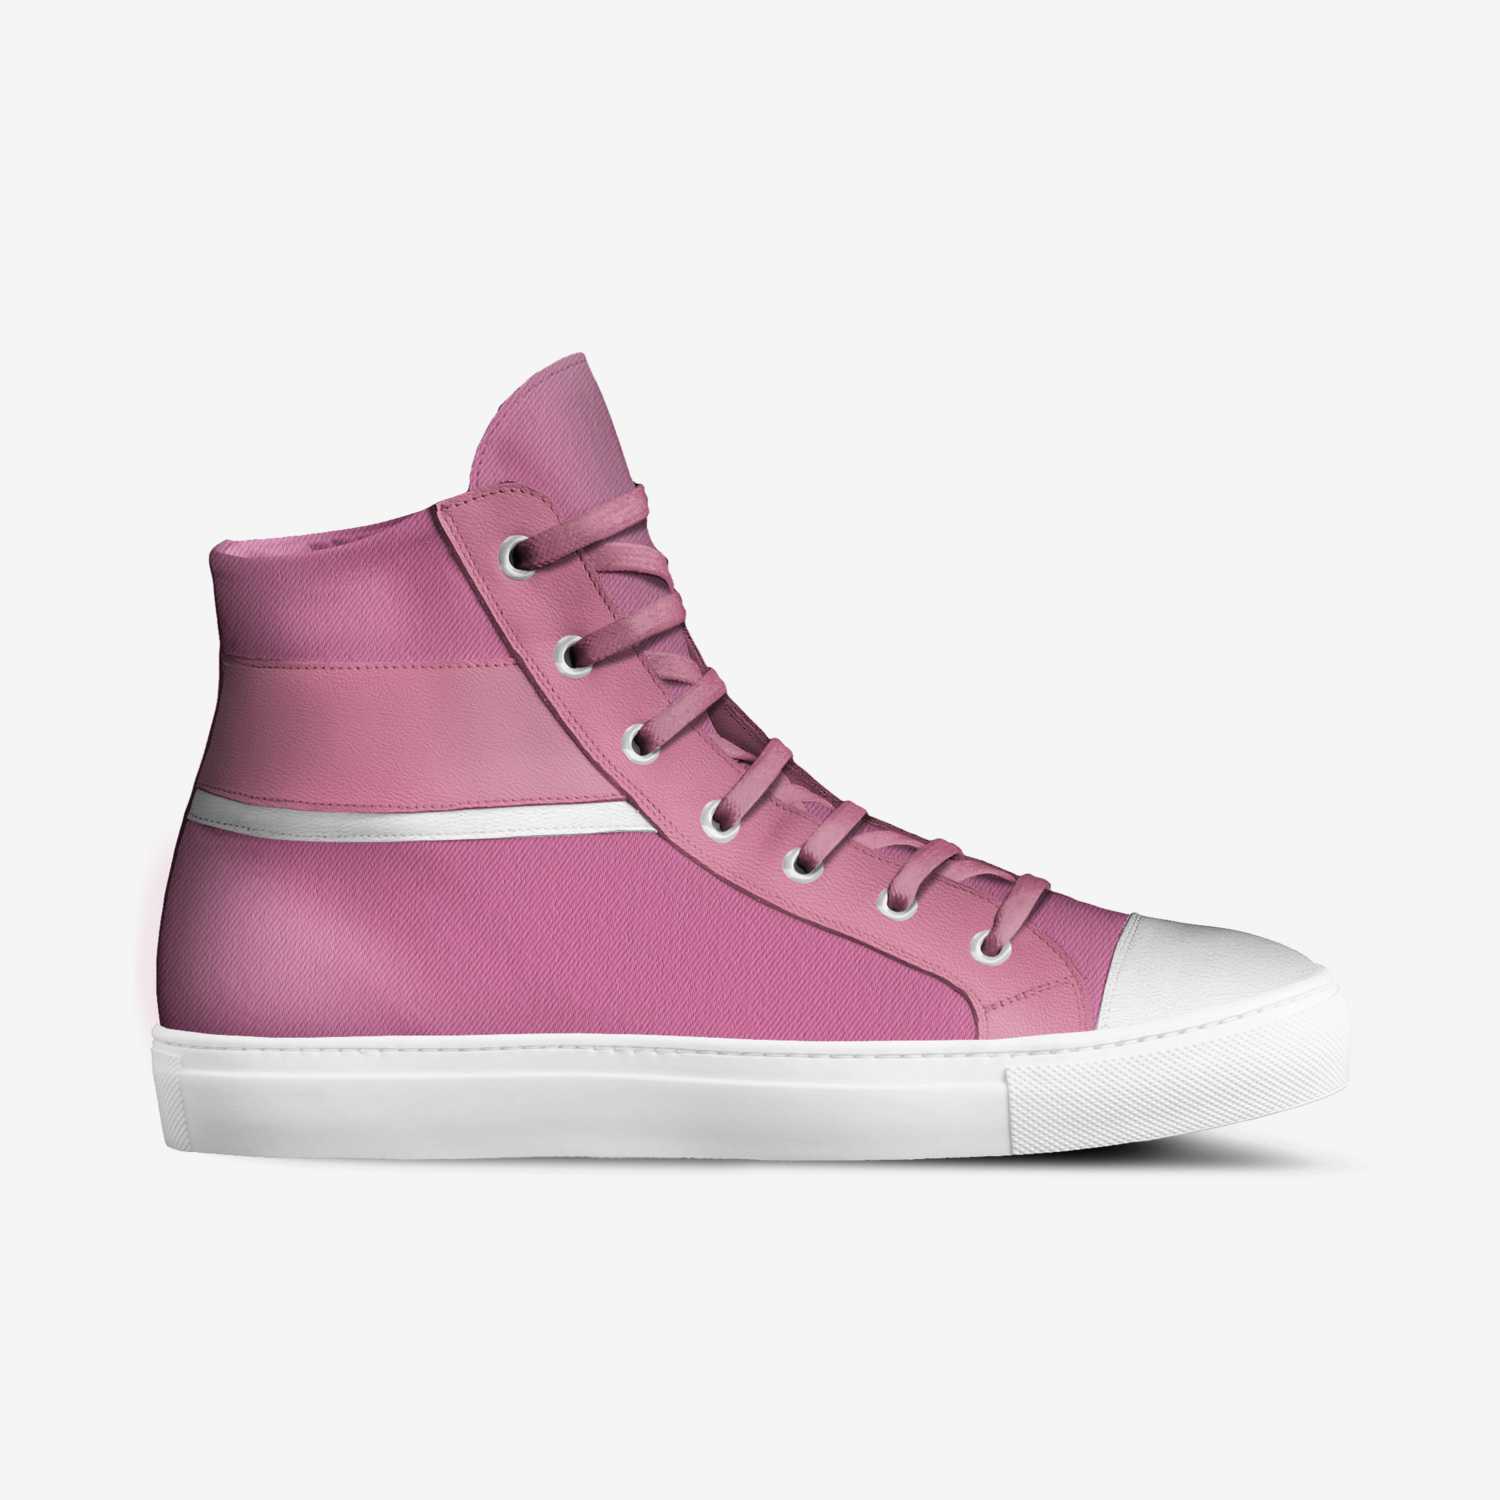 Pink Canvas custom made in Italy shoes by Elisa Benitez | Side view